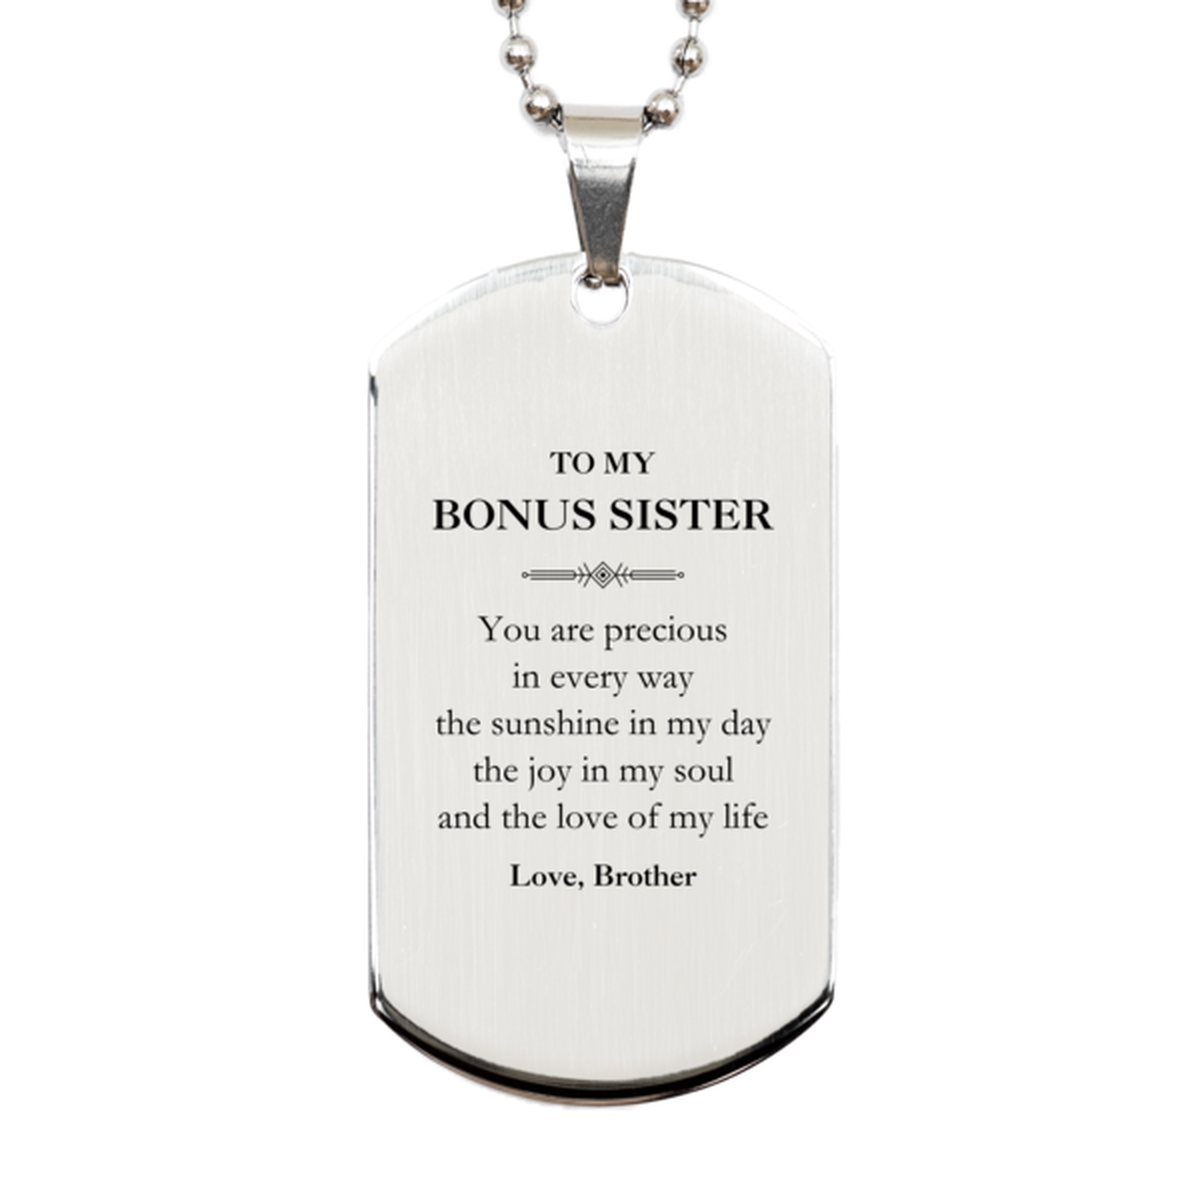 Graduation Gifts for Bonus Sister Silver Dog Tag Present from Brother, Christmas Bonus Sister Birthday Gifts Bonus Sister You are precious in every way the sunshine in my day. Love, Brother